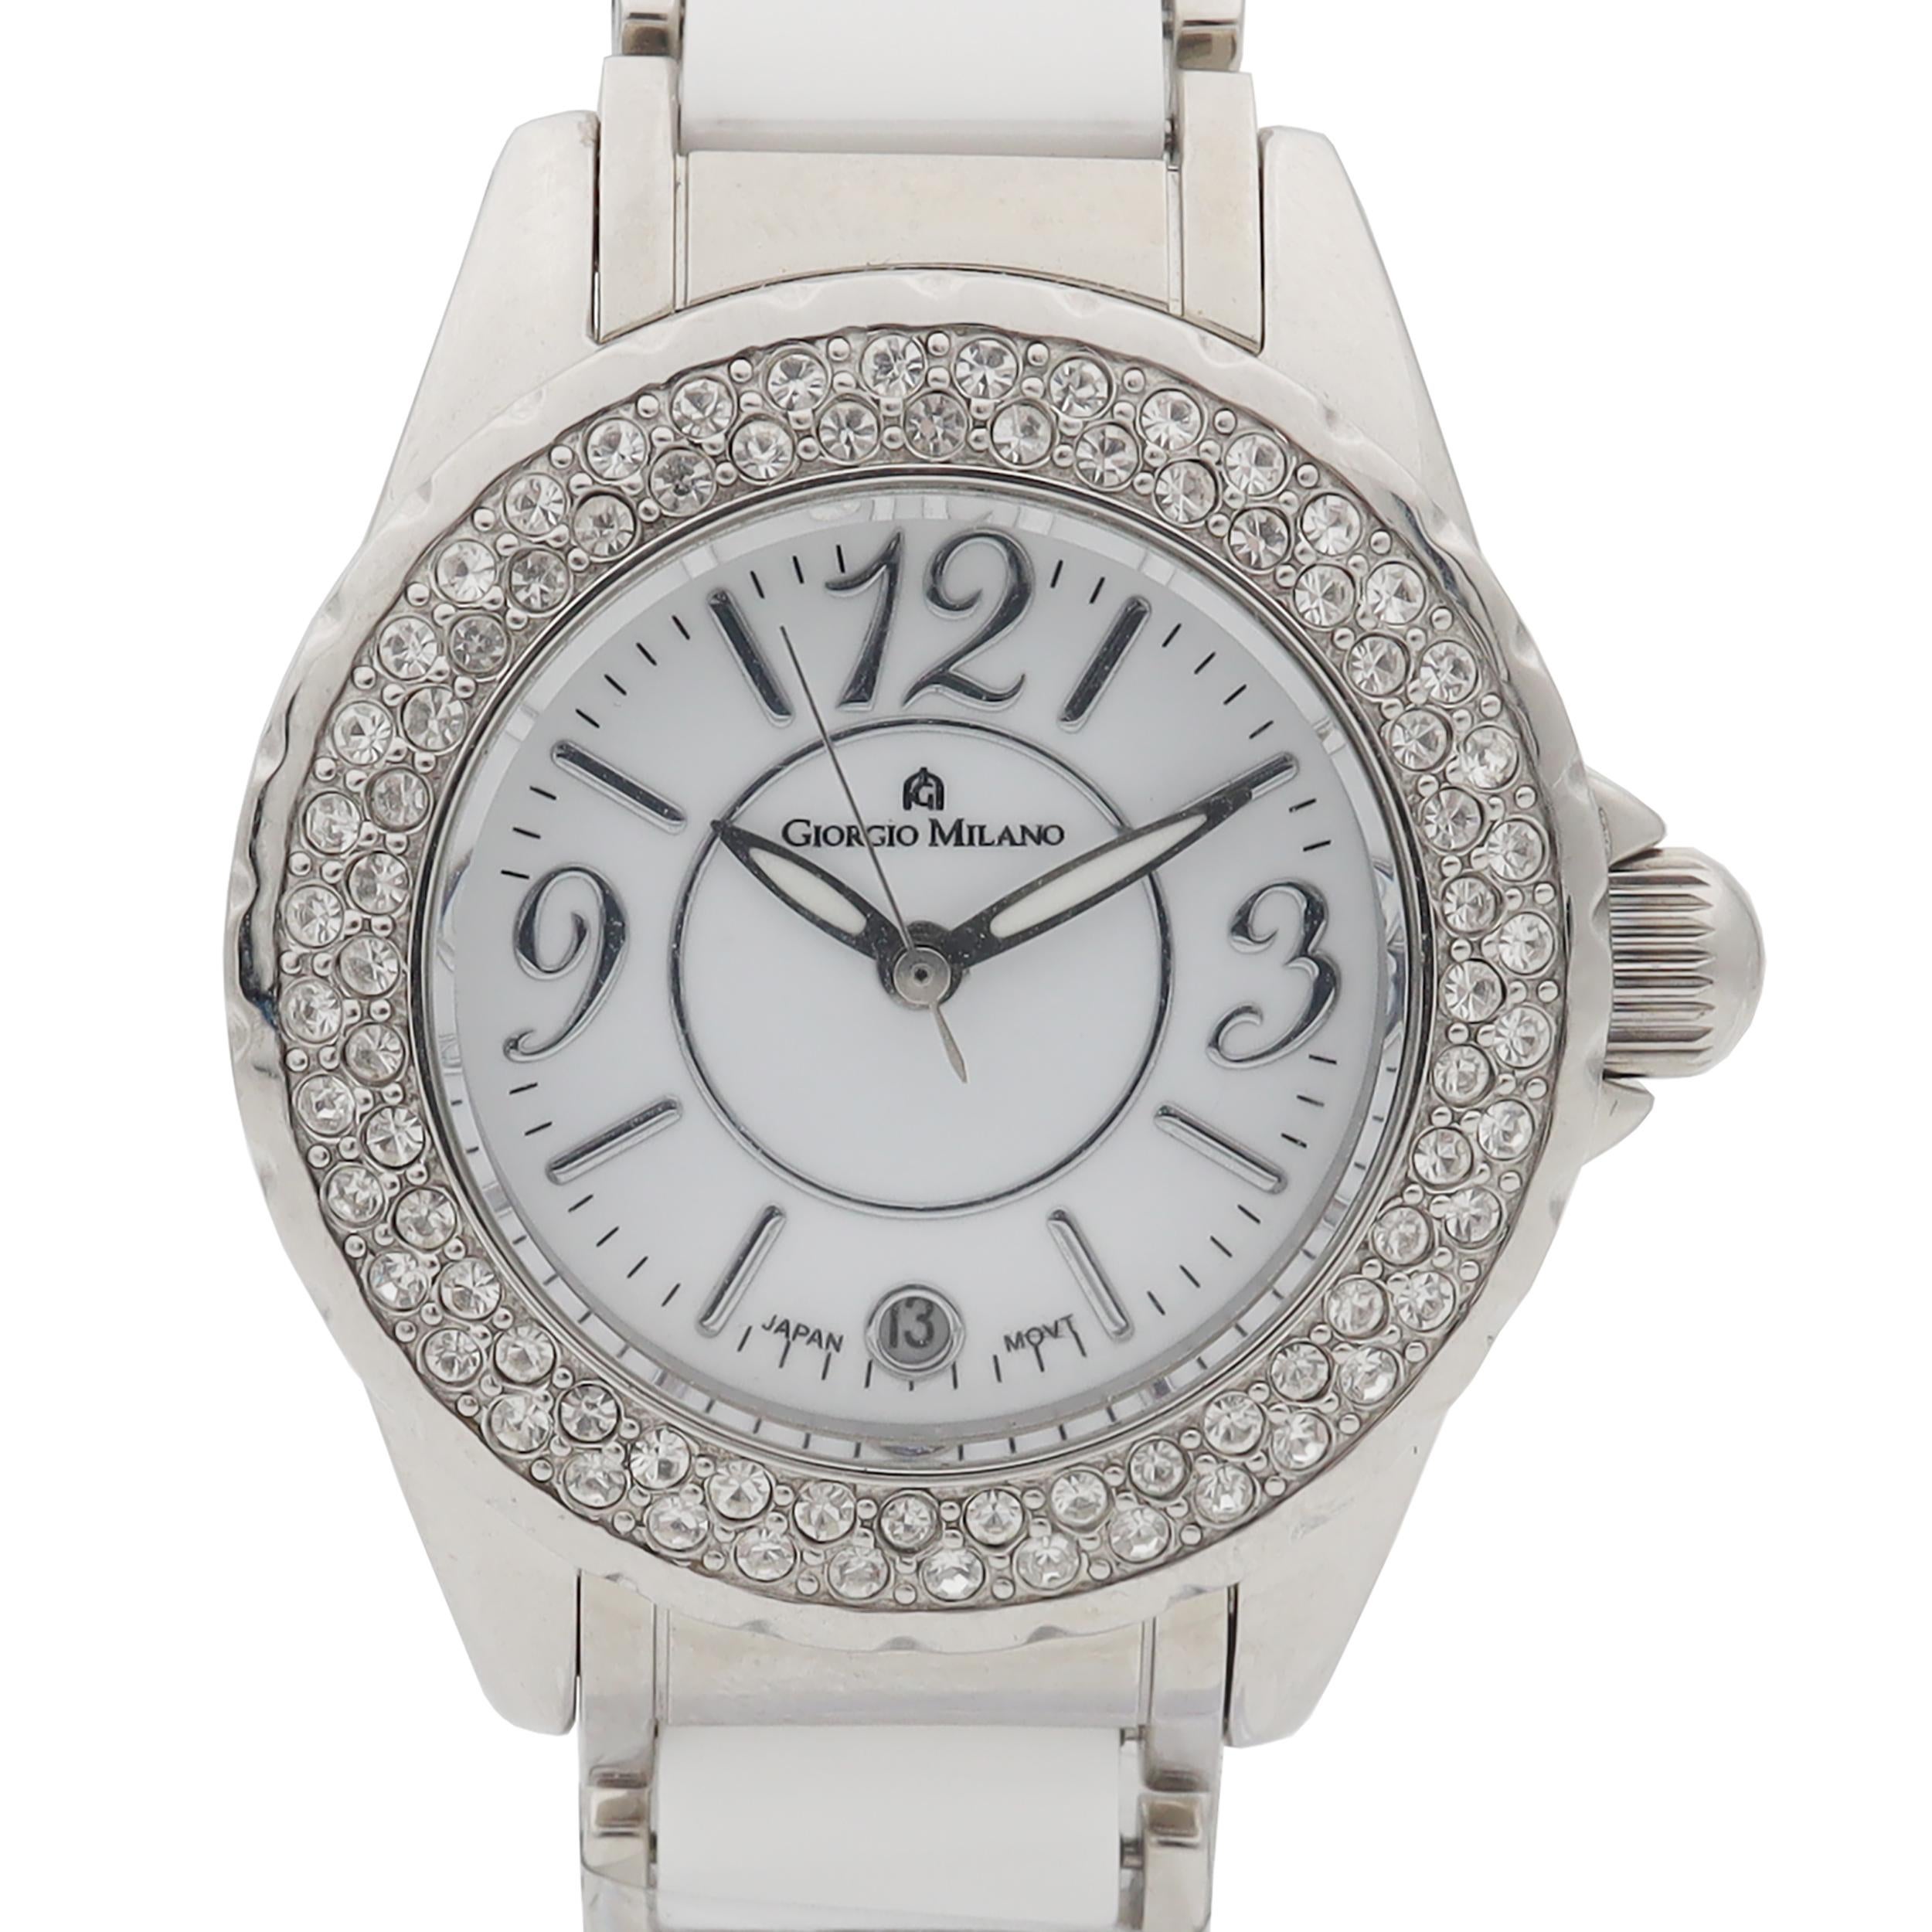 Giorgio Milano Stainless Steel White Dial Quartz Ladies Watch GM705SLWH.
Comes with original box and papers.